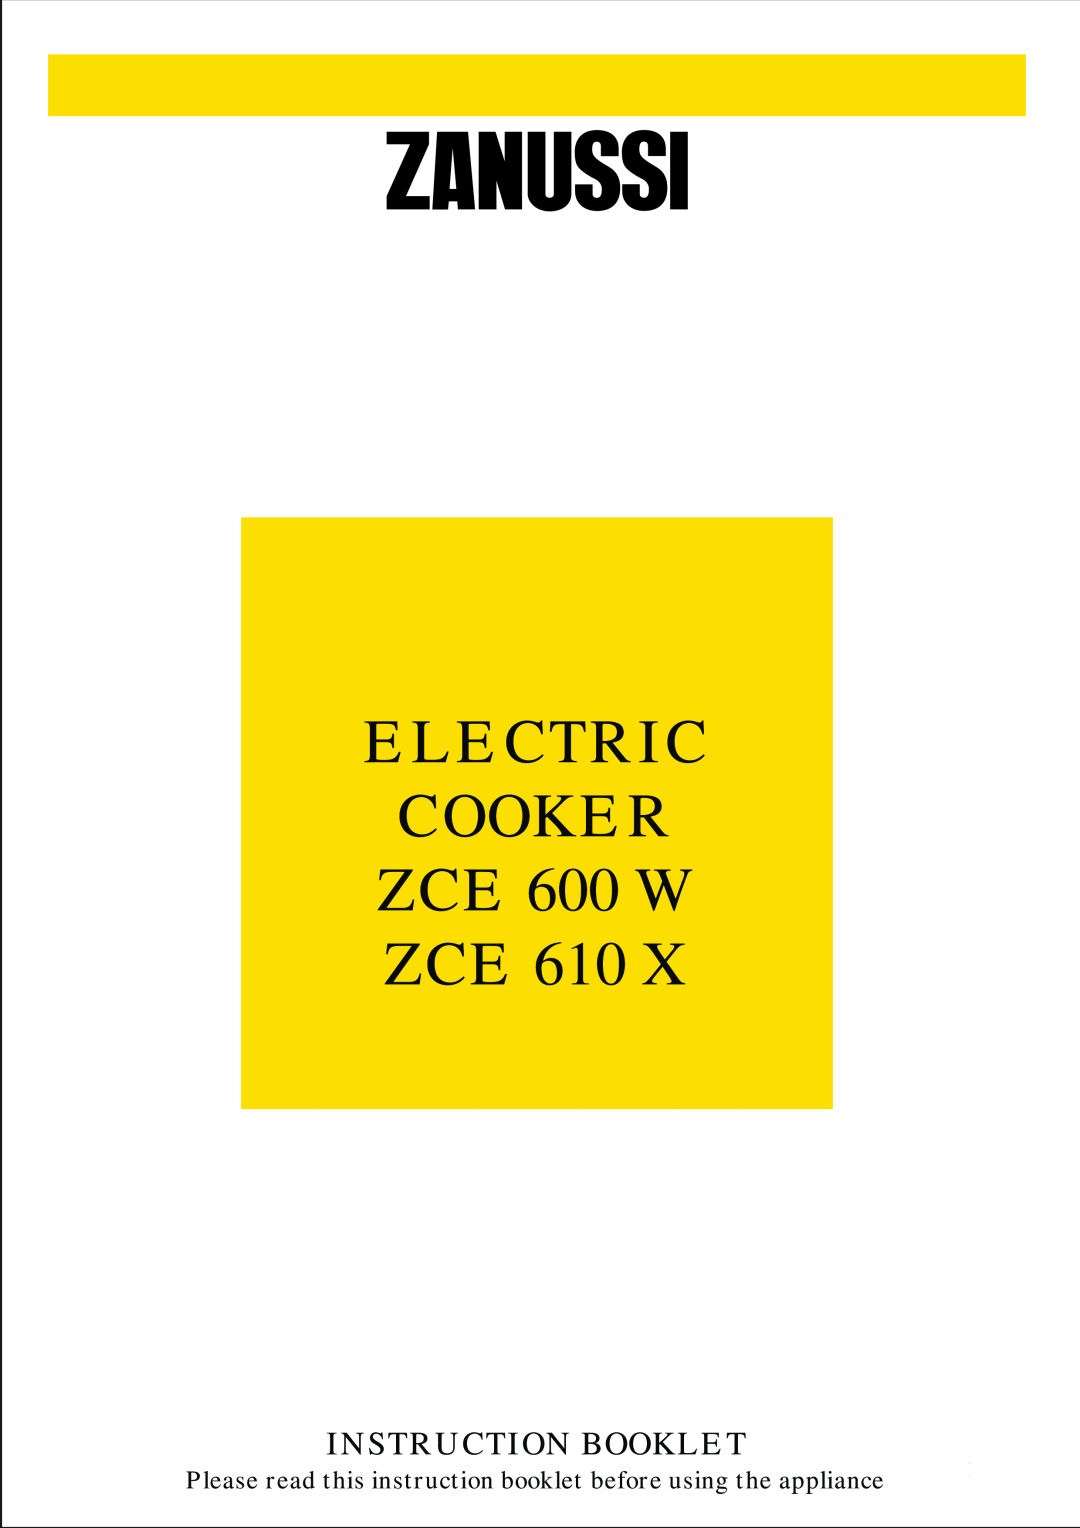 Zanussi ZCE 610 X manual ELECTRIC COOKER ZCE 600 W ZCE, Instruction Booklet 